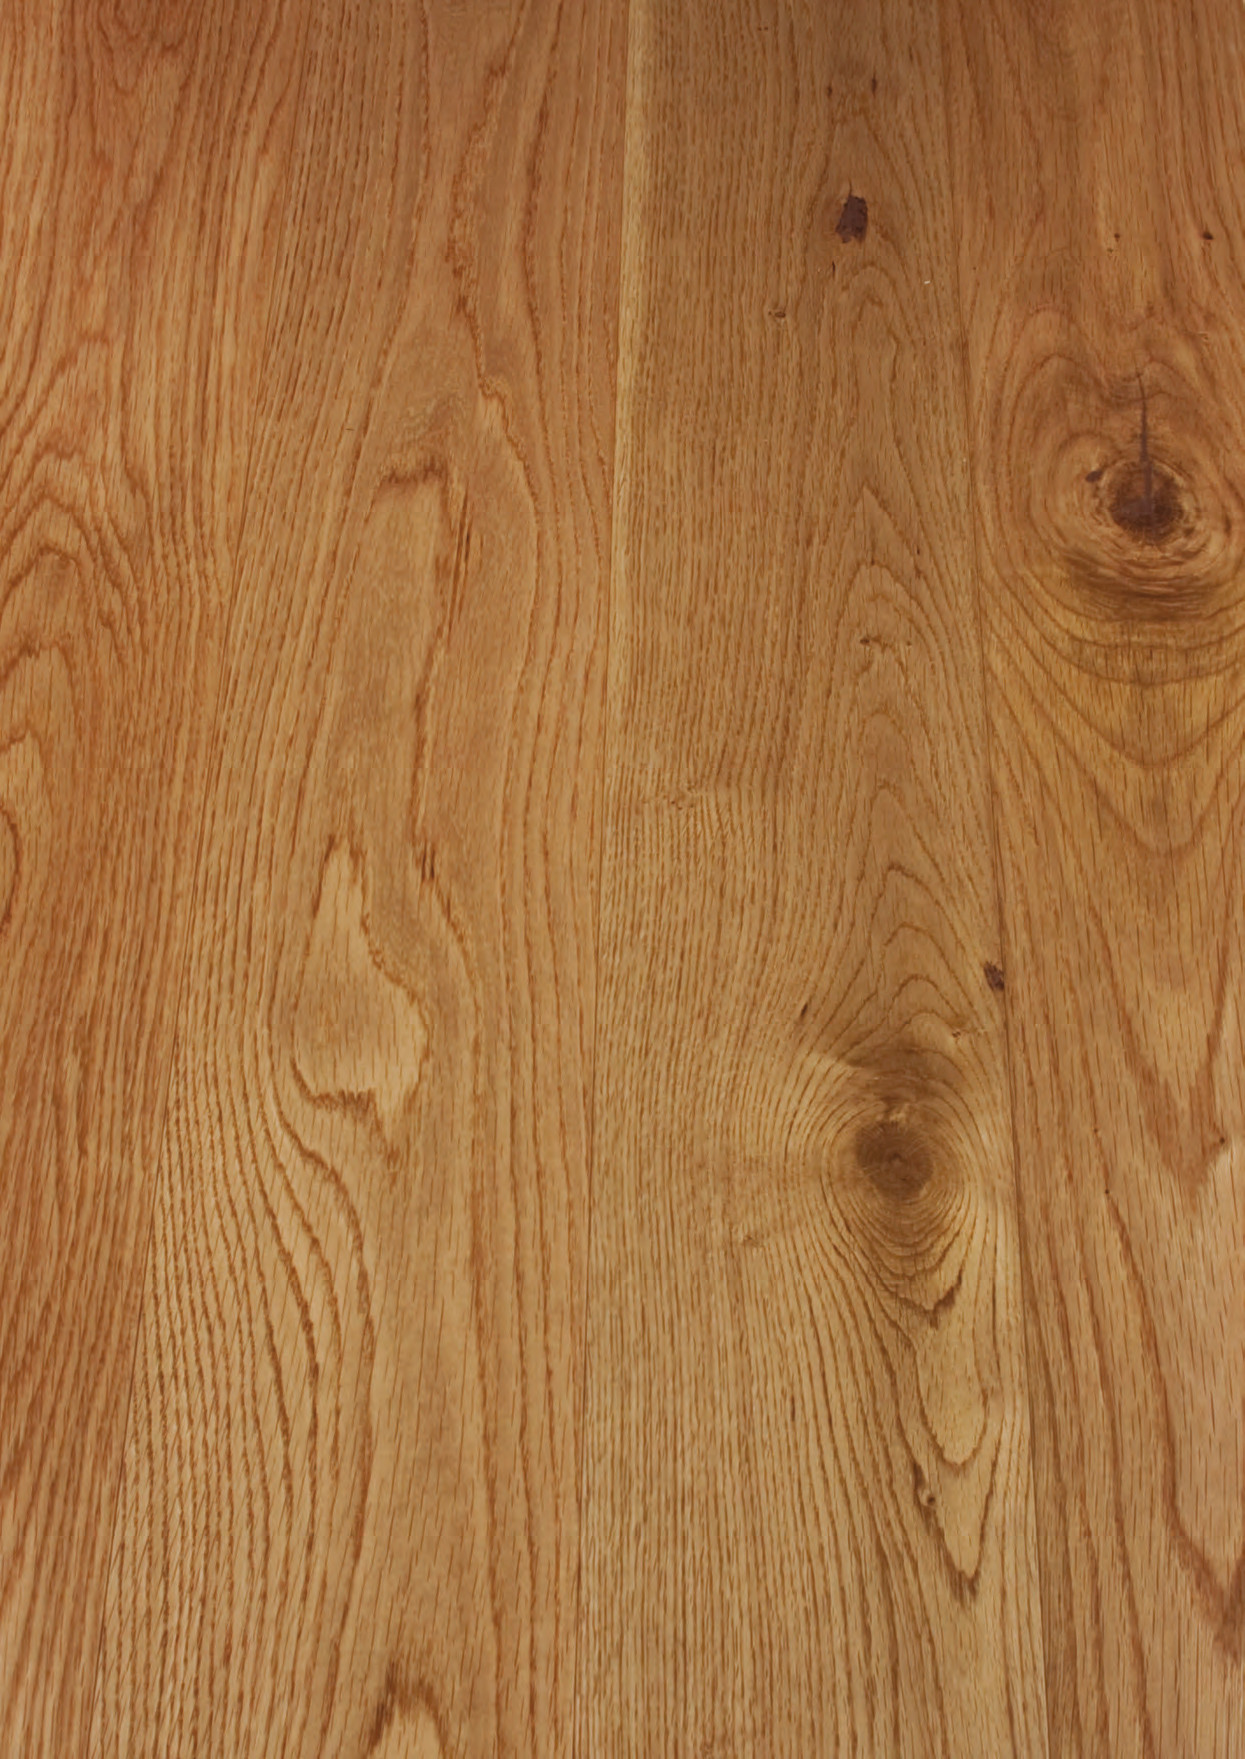 23 Famous Rustic Hardwood Flooring for Sale 2022 free download rustic hardwood flooring for sale of brooks bros for hardwood flooring 2016 17 price list pdf throughout can t find what you re looking for call your l ocal